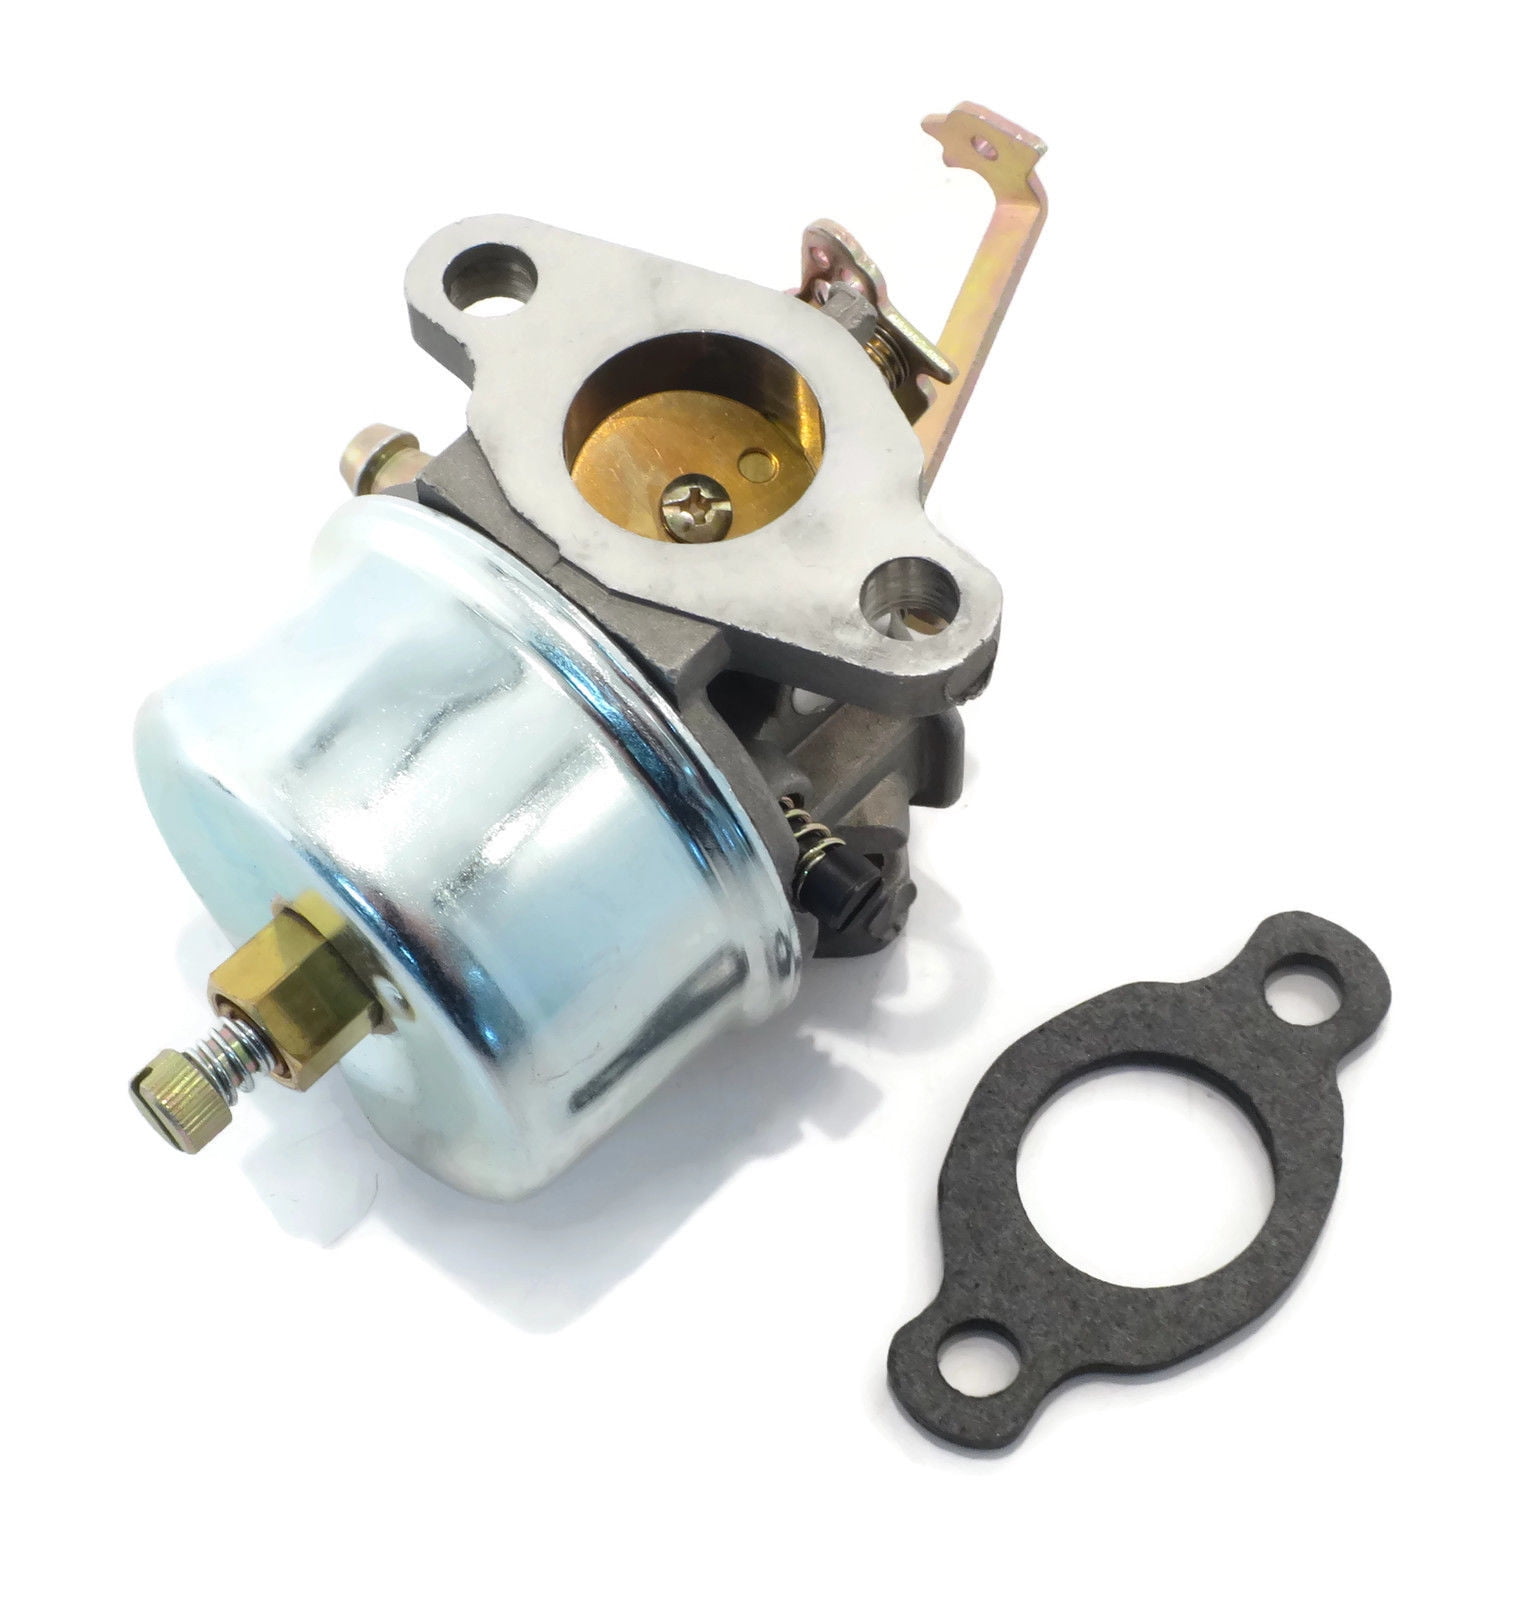 Details about   632230 Carburetor for Tecumseh 5HP 6HP H30 H50 H60 HH60 632272 w/Gasket